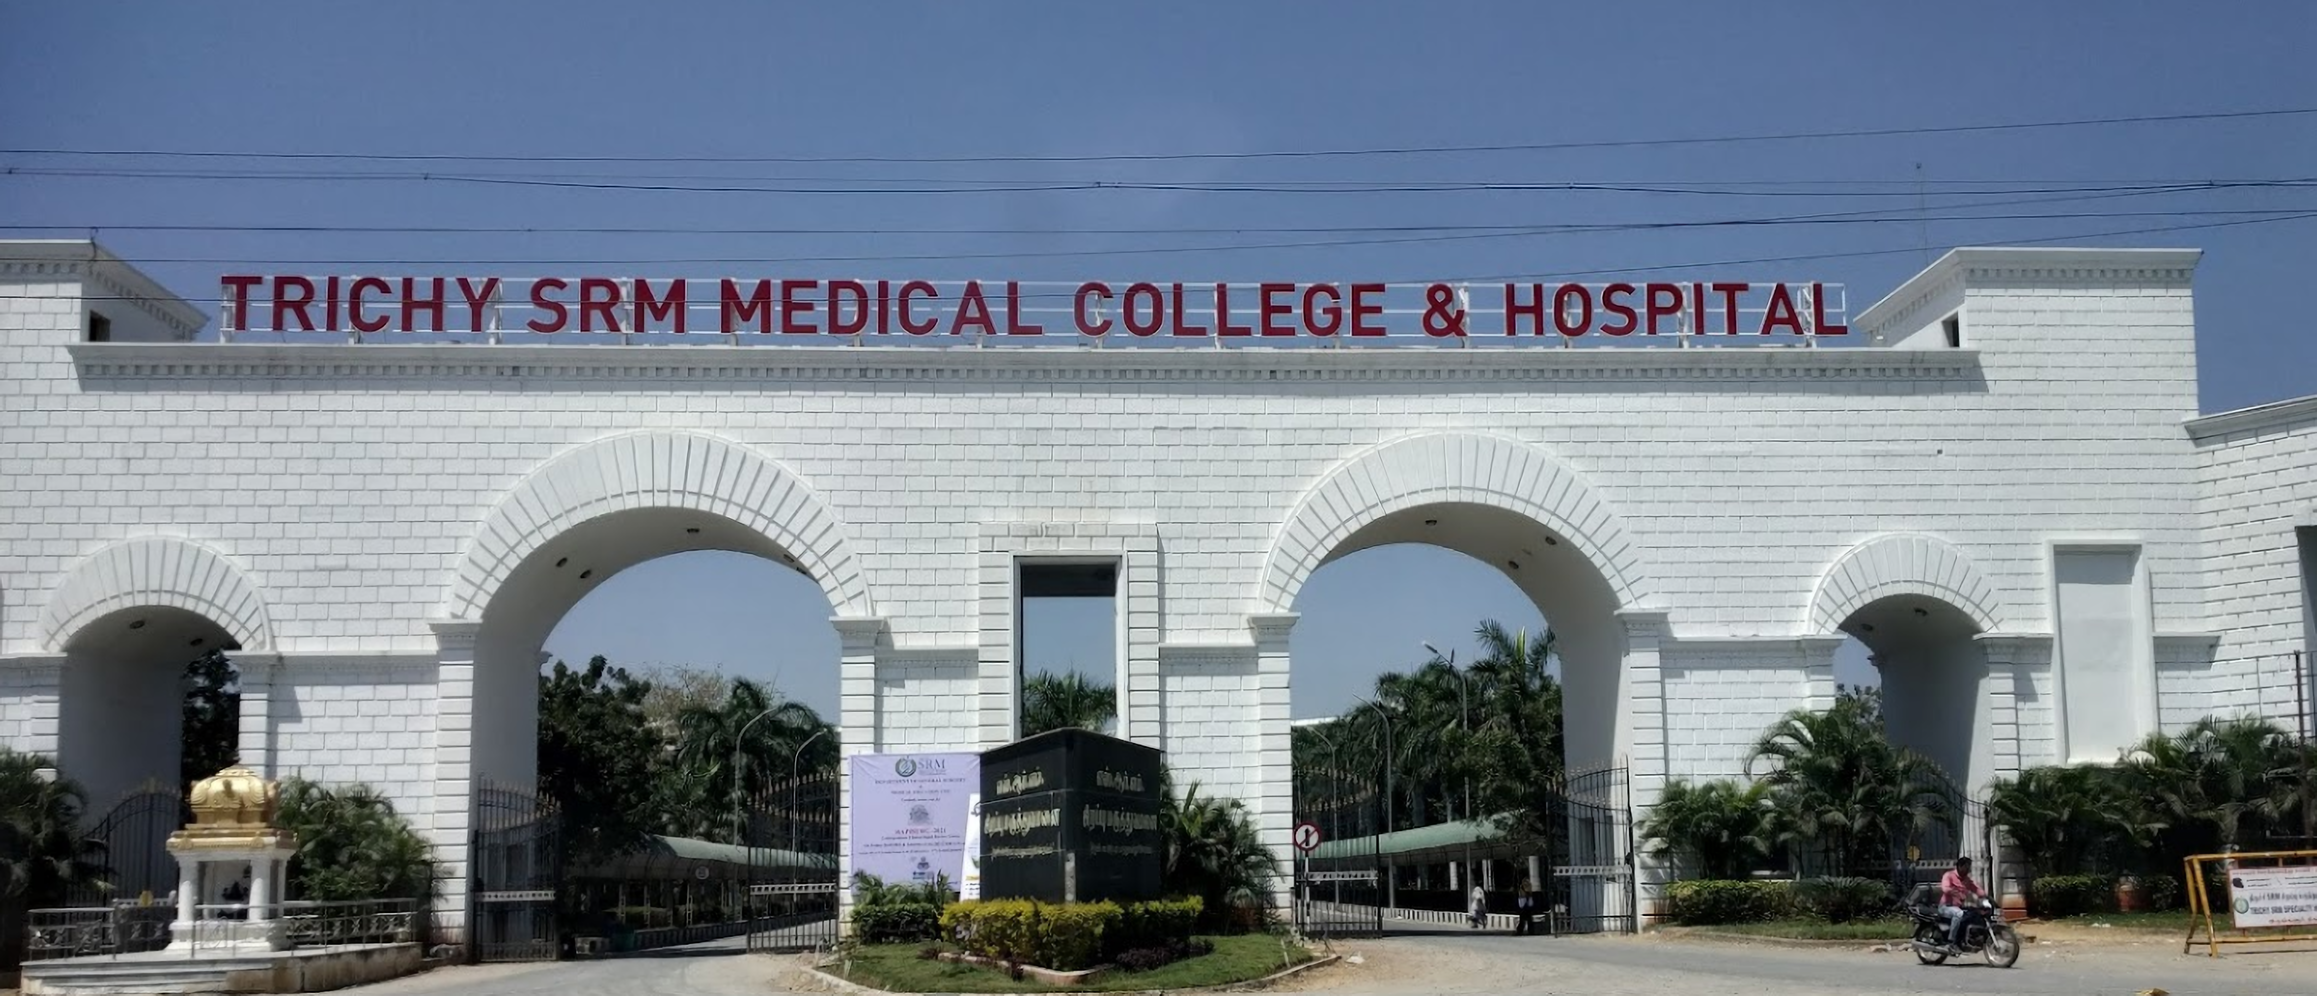 Trichy Srm Medical College Hospital And Research Centre